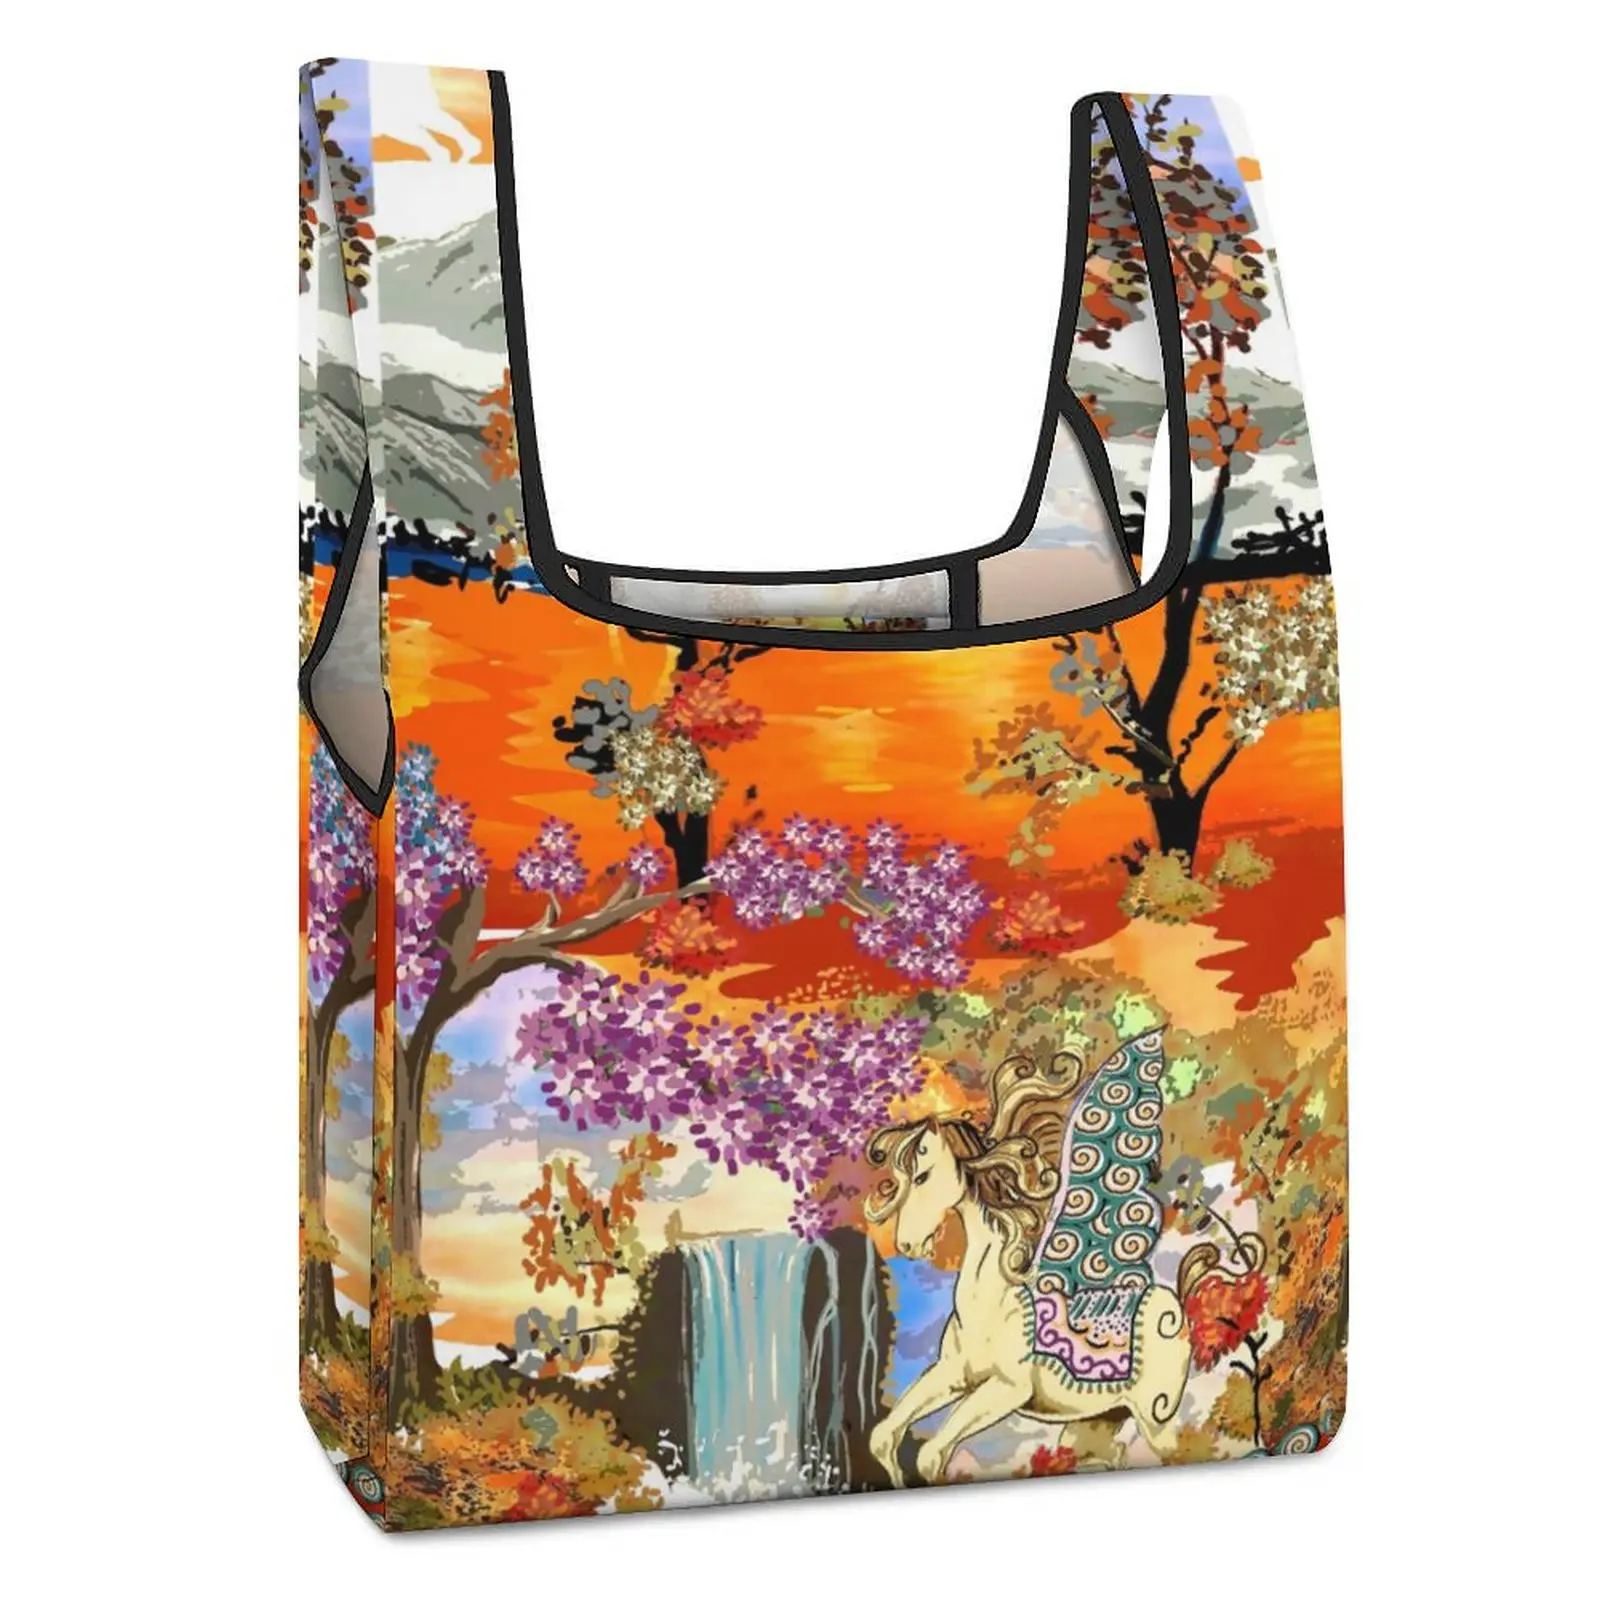 Customized Printed Collapsible Shopping Bag Double Strap Handbag Colored Printing Tote Casual Woman Grocery Bag Custom Pattern saja foldable shopping bag large capacity tote bag woman s shoulder bags cat animal pattern female gril beach travel grocery bag